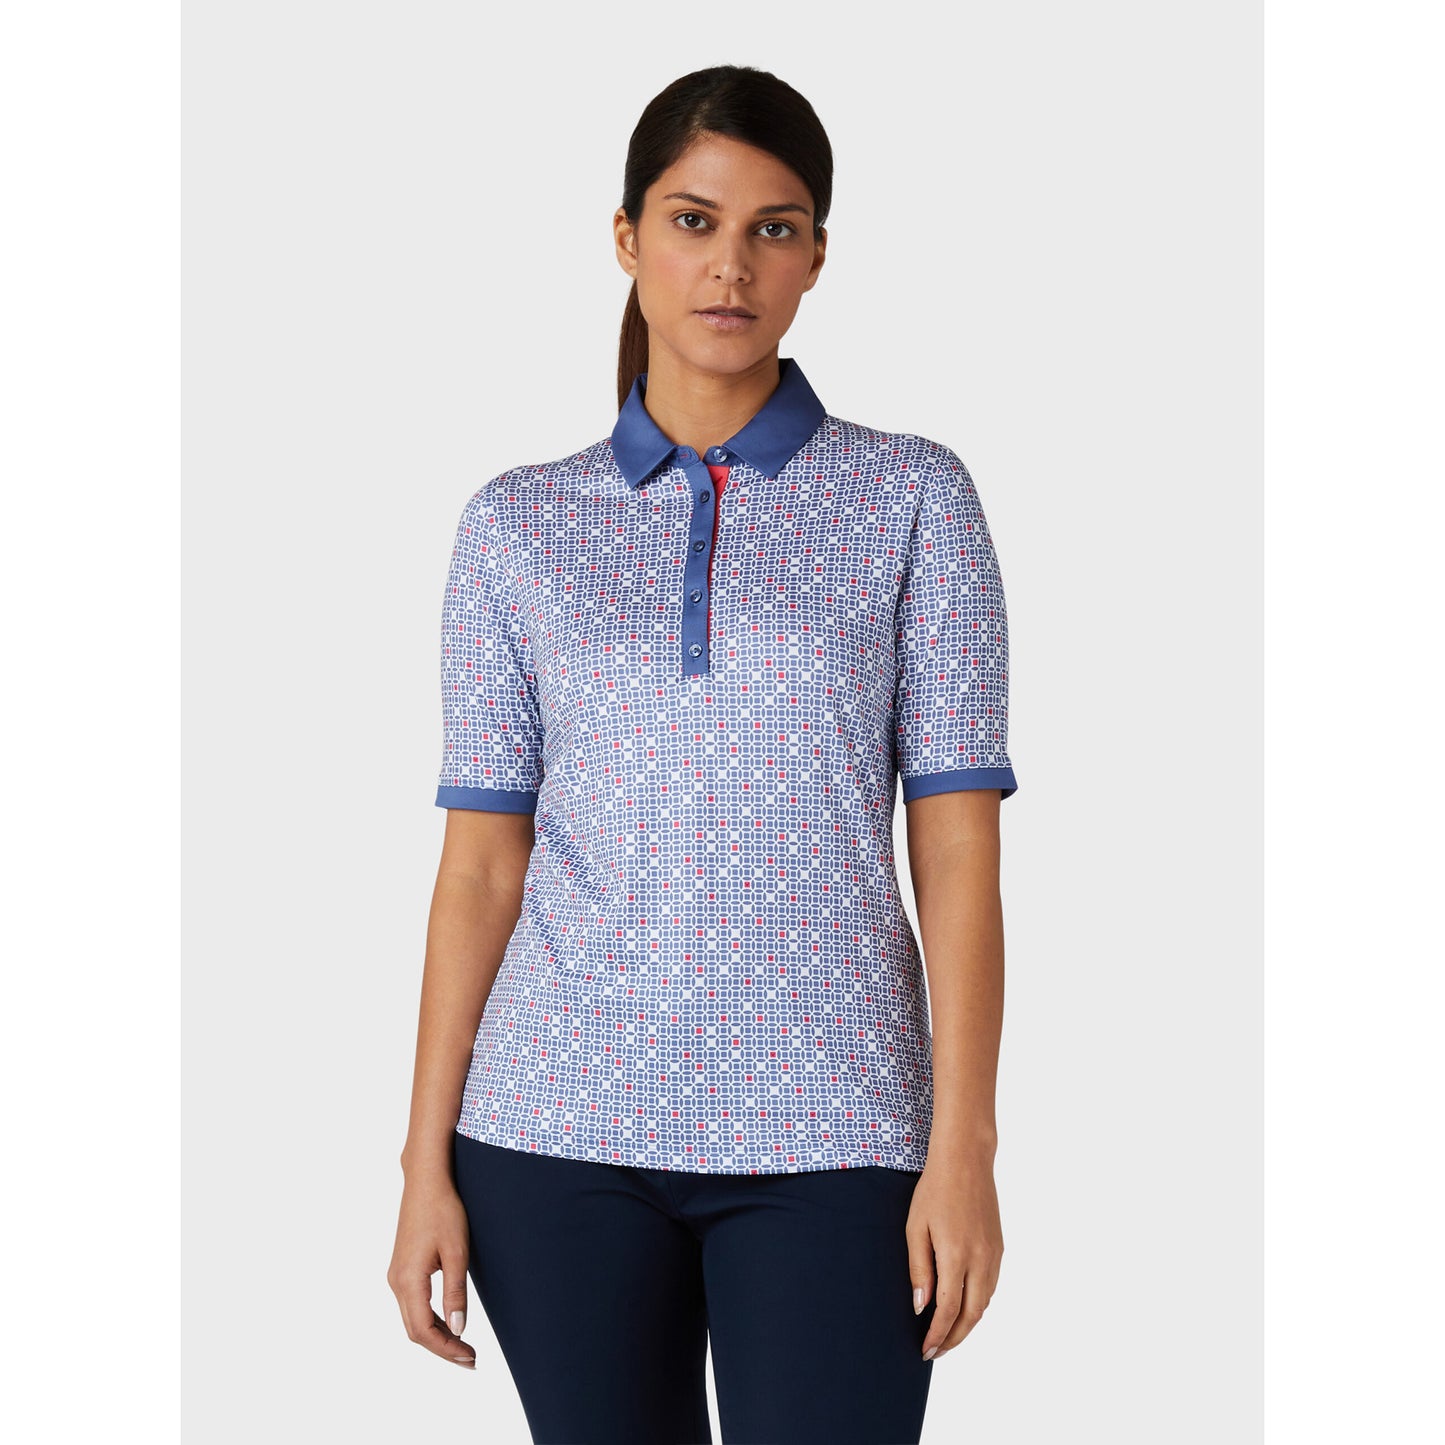 Callaway Ladies Short Sleeve Polo Shirt with Mesh Insert Detail in Coastal Fjord